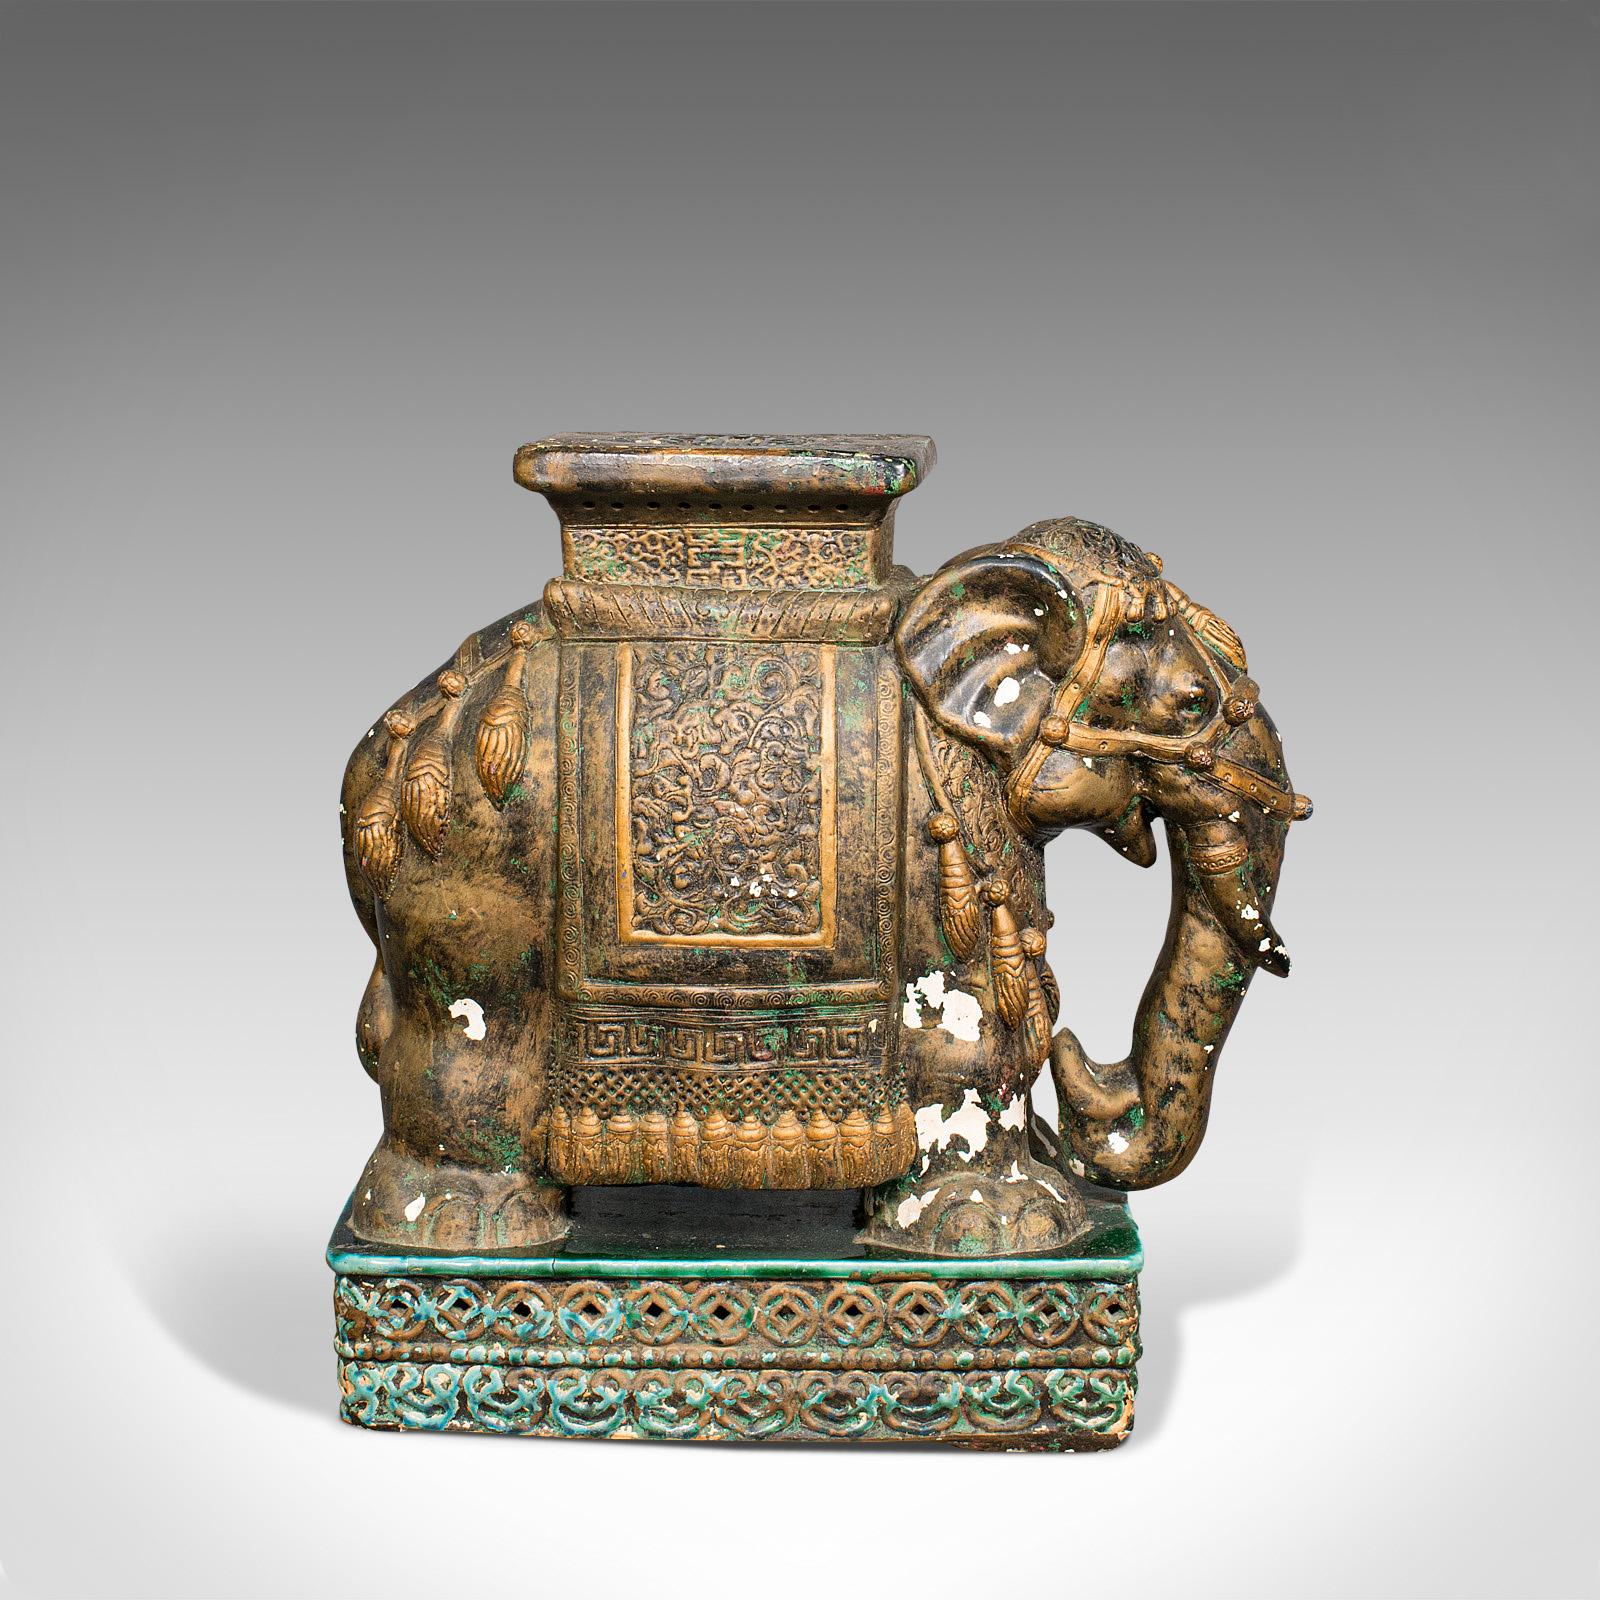 19th Century Pair of Antique Decorative Elephant Side Table, Indian, Ceramic, Occasional